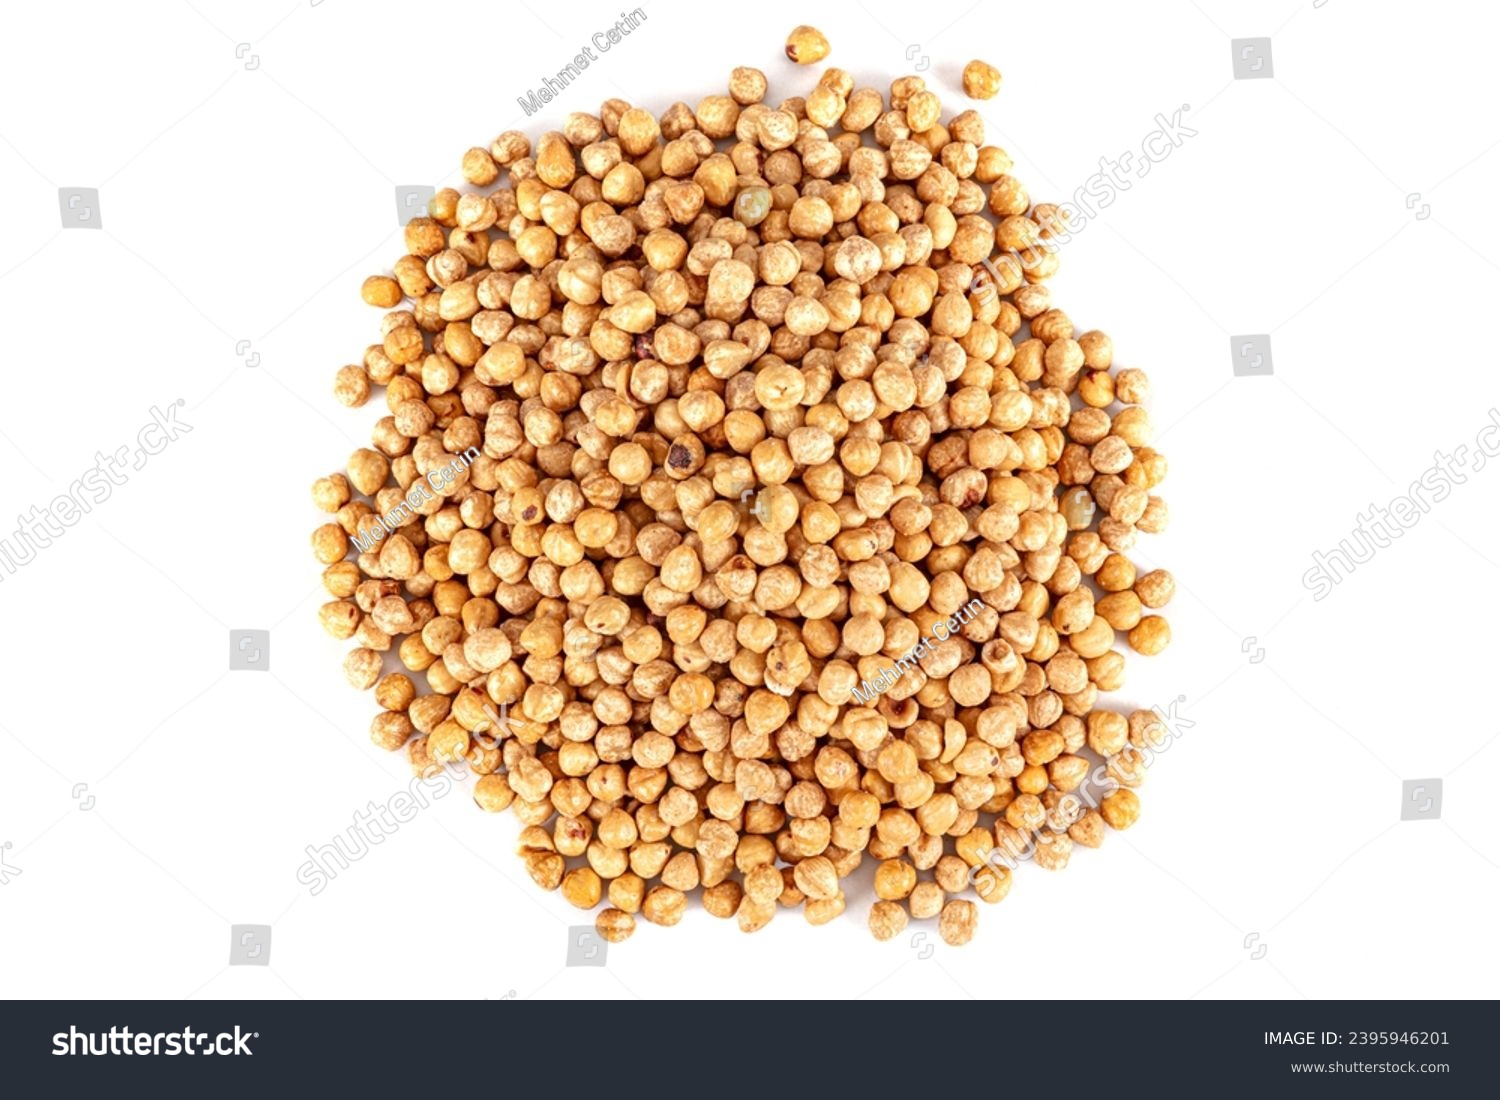 Pile of roasted nuts on white background. Hazelnuts harvest. Filbert photo wallpaper. Full frame of hazel. Peeled brown nut kernels. Healthy organic bio products. Vegetarian, vegan and raw food. #2395946201